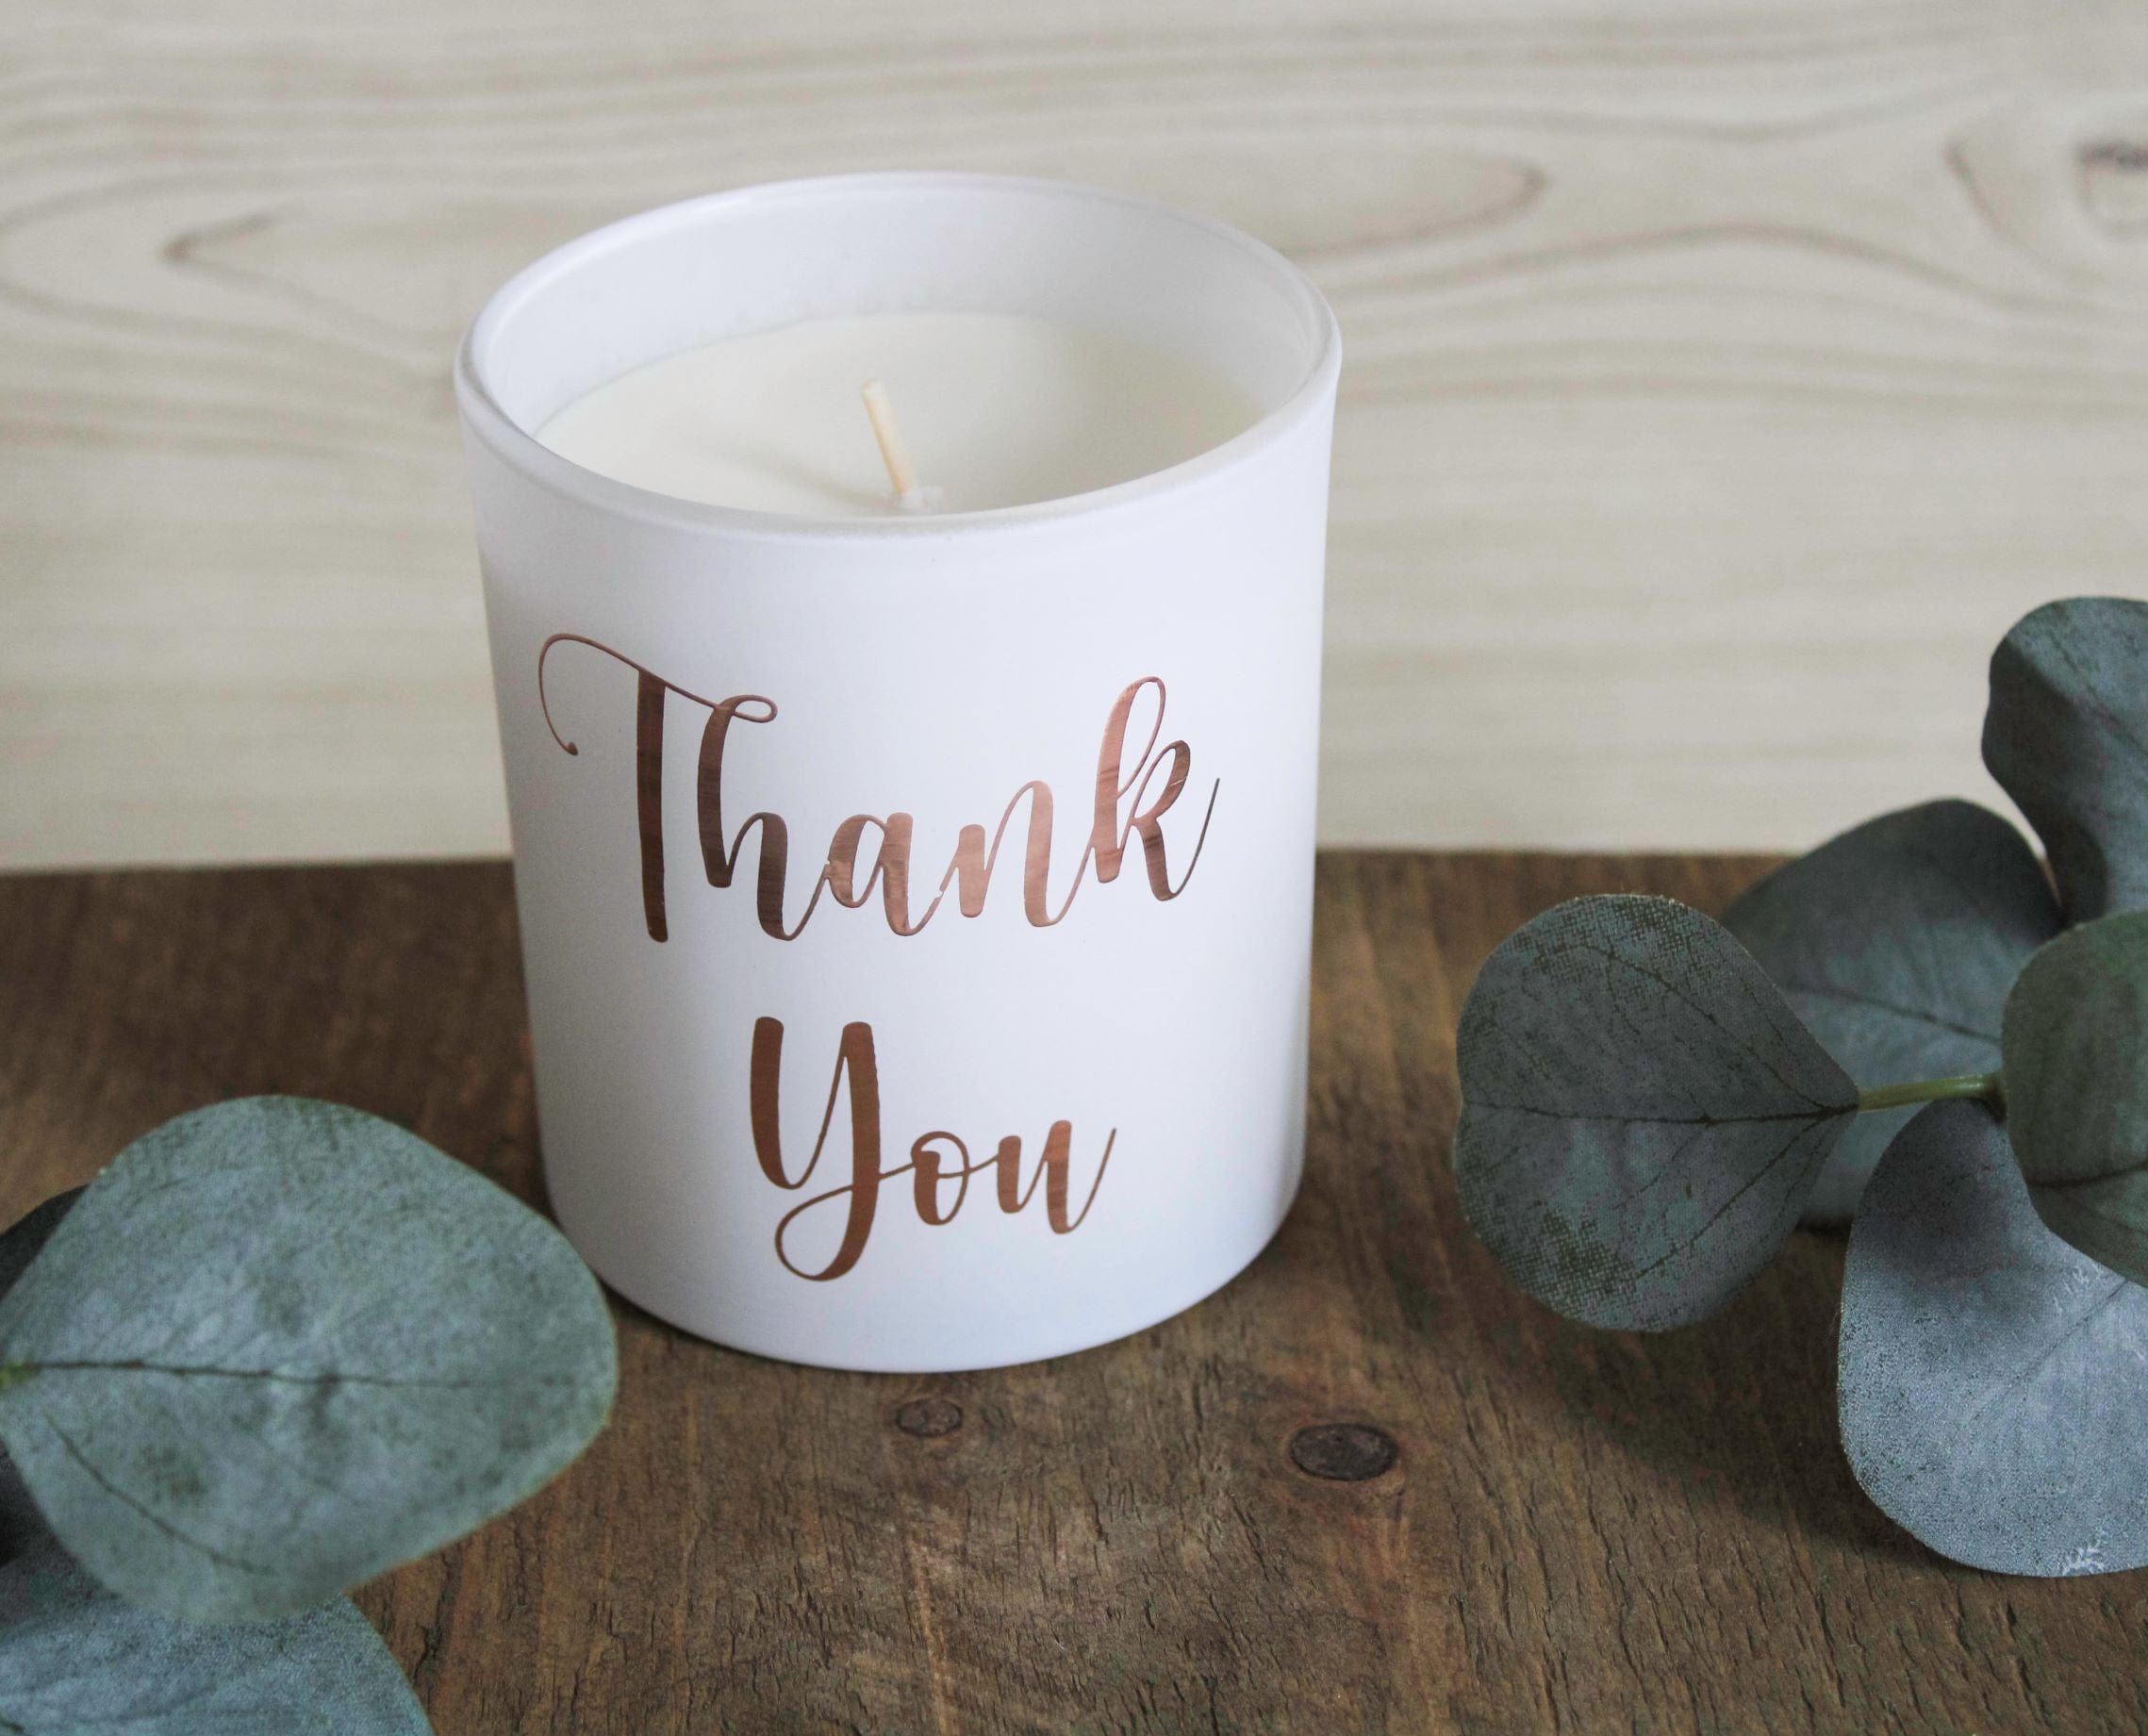 Thank You: Soy InnerVoice Candle